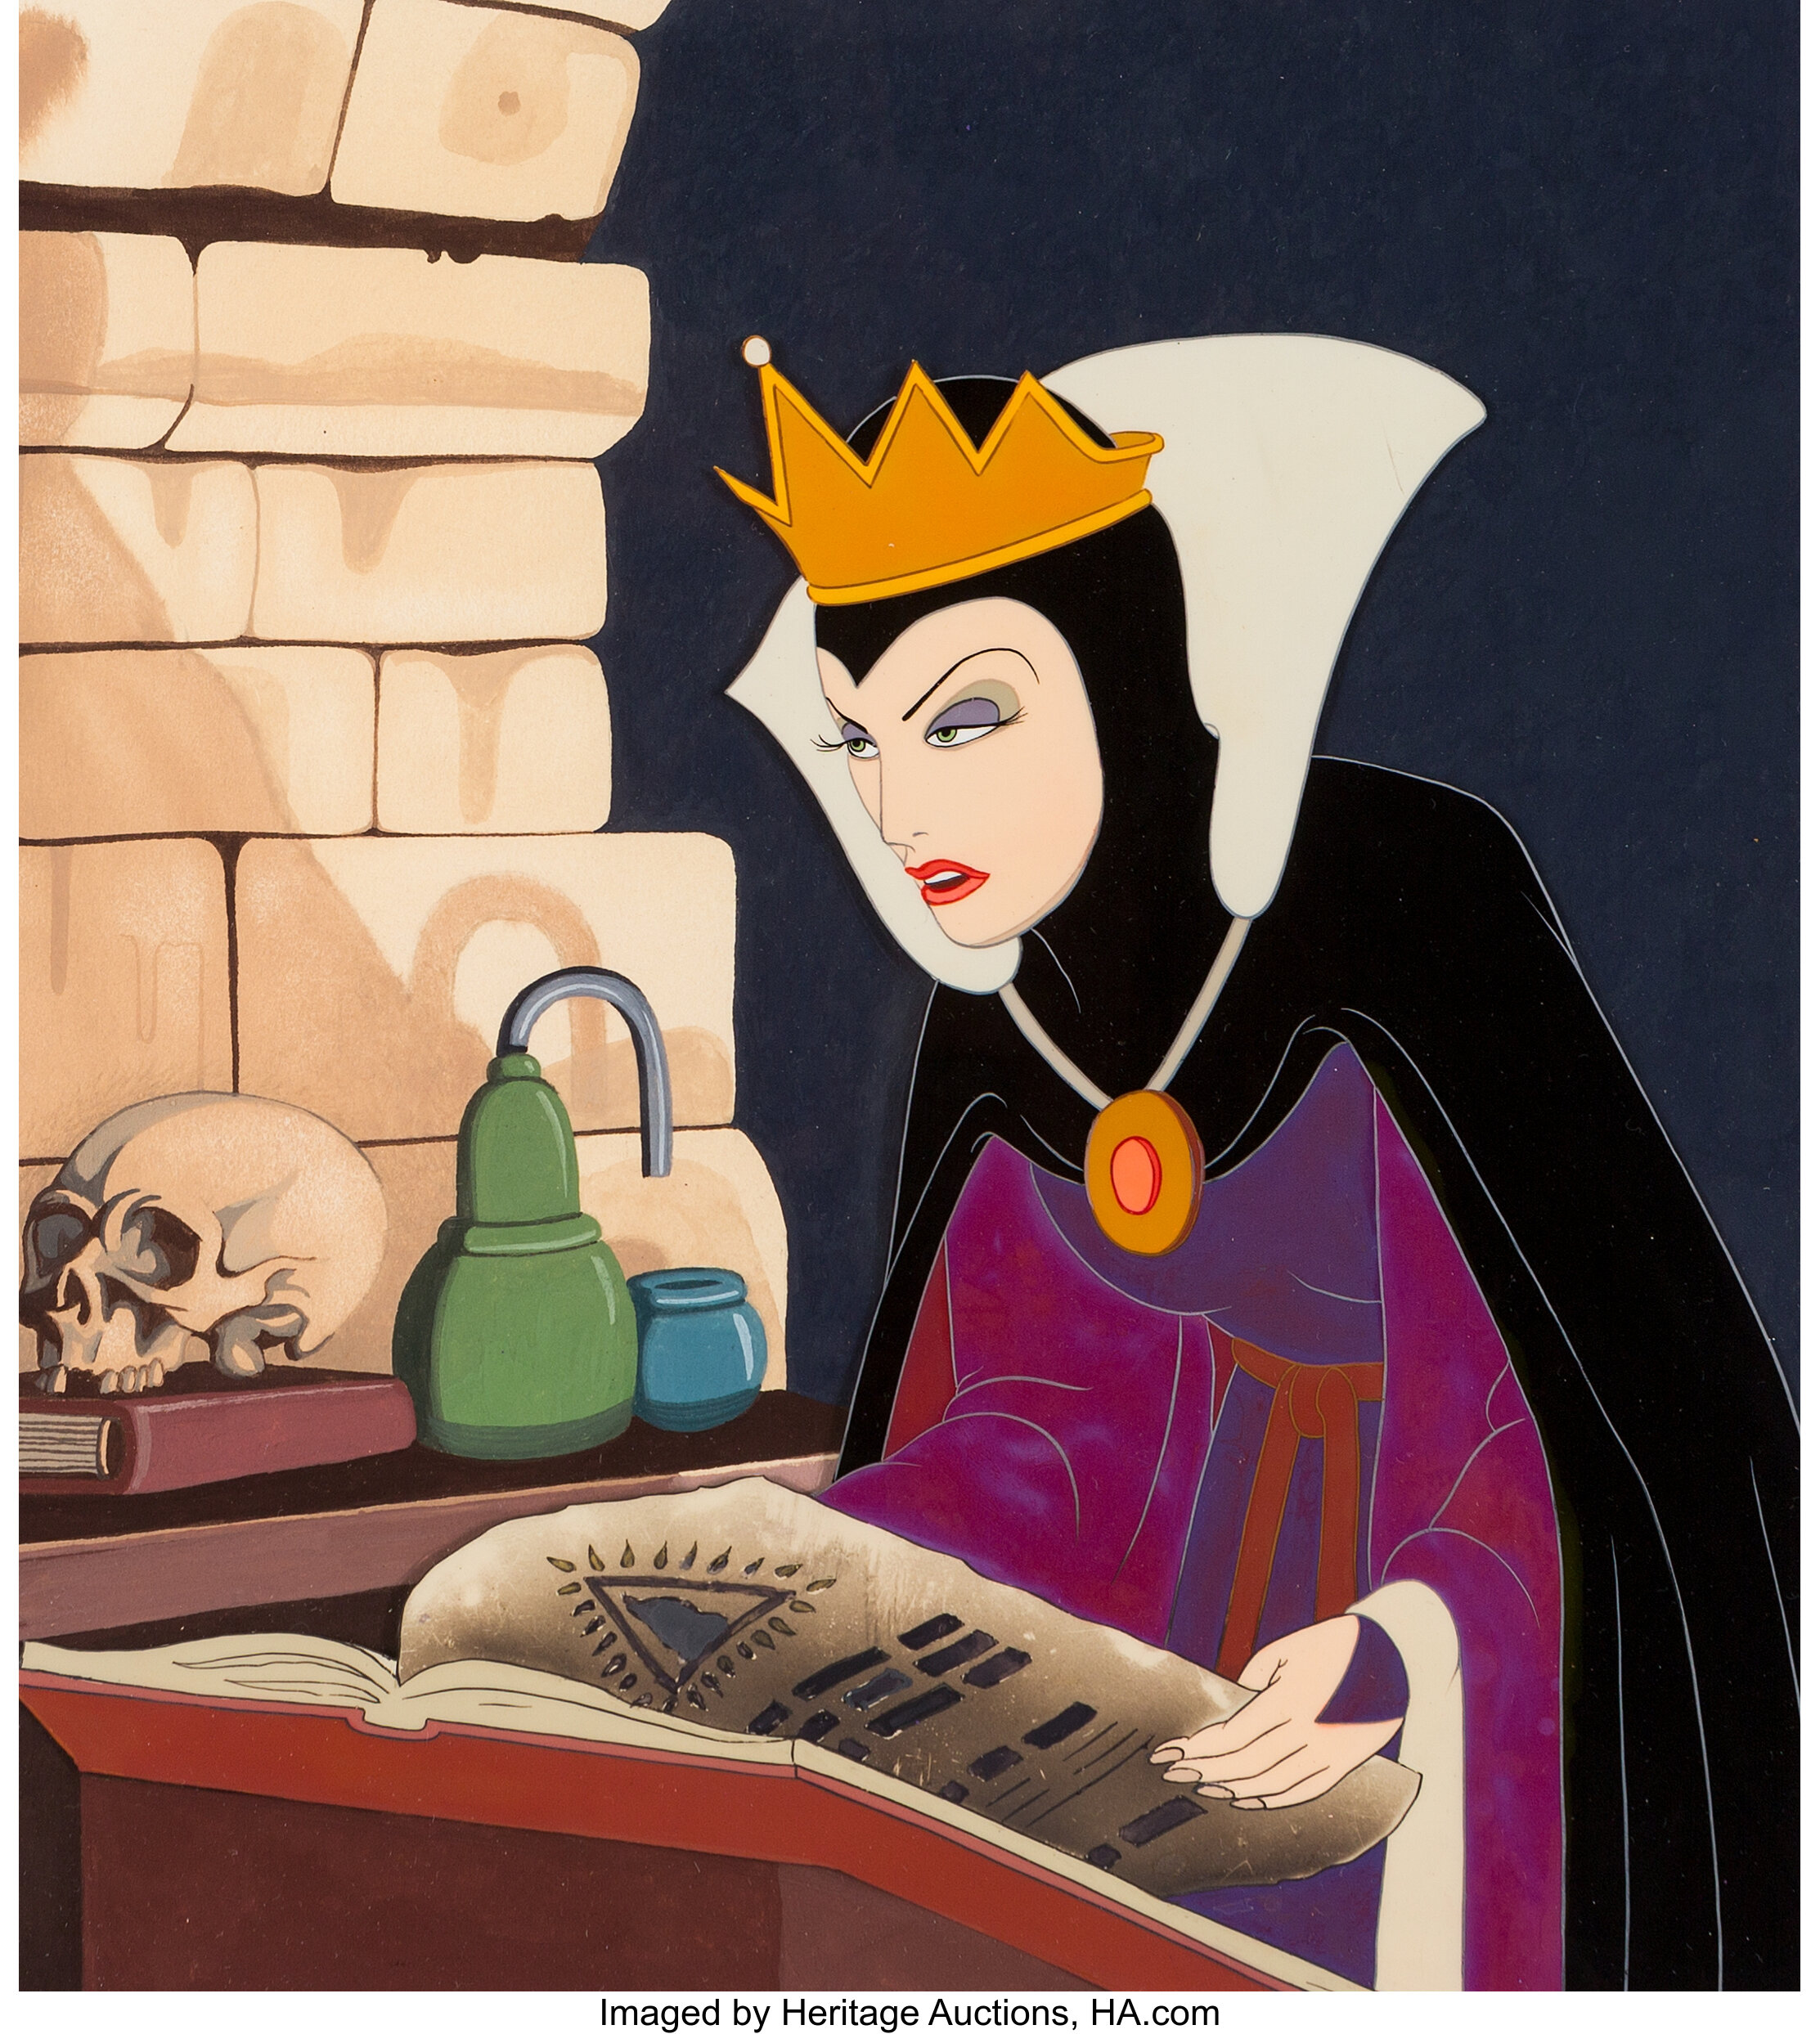 Snow White and the Seven Dwarfs Exceptional Evil Queen Production